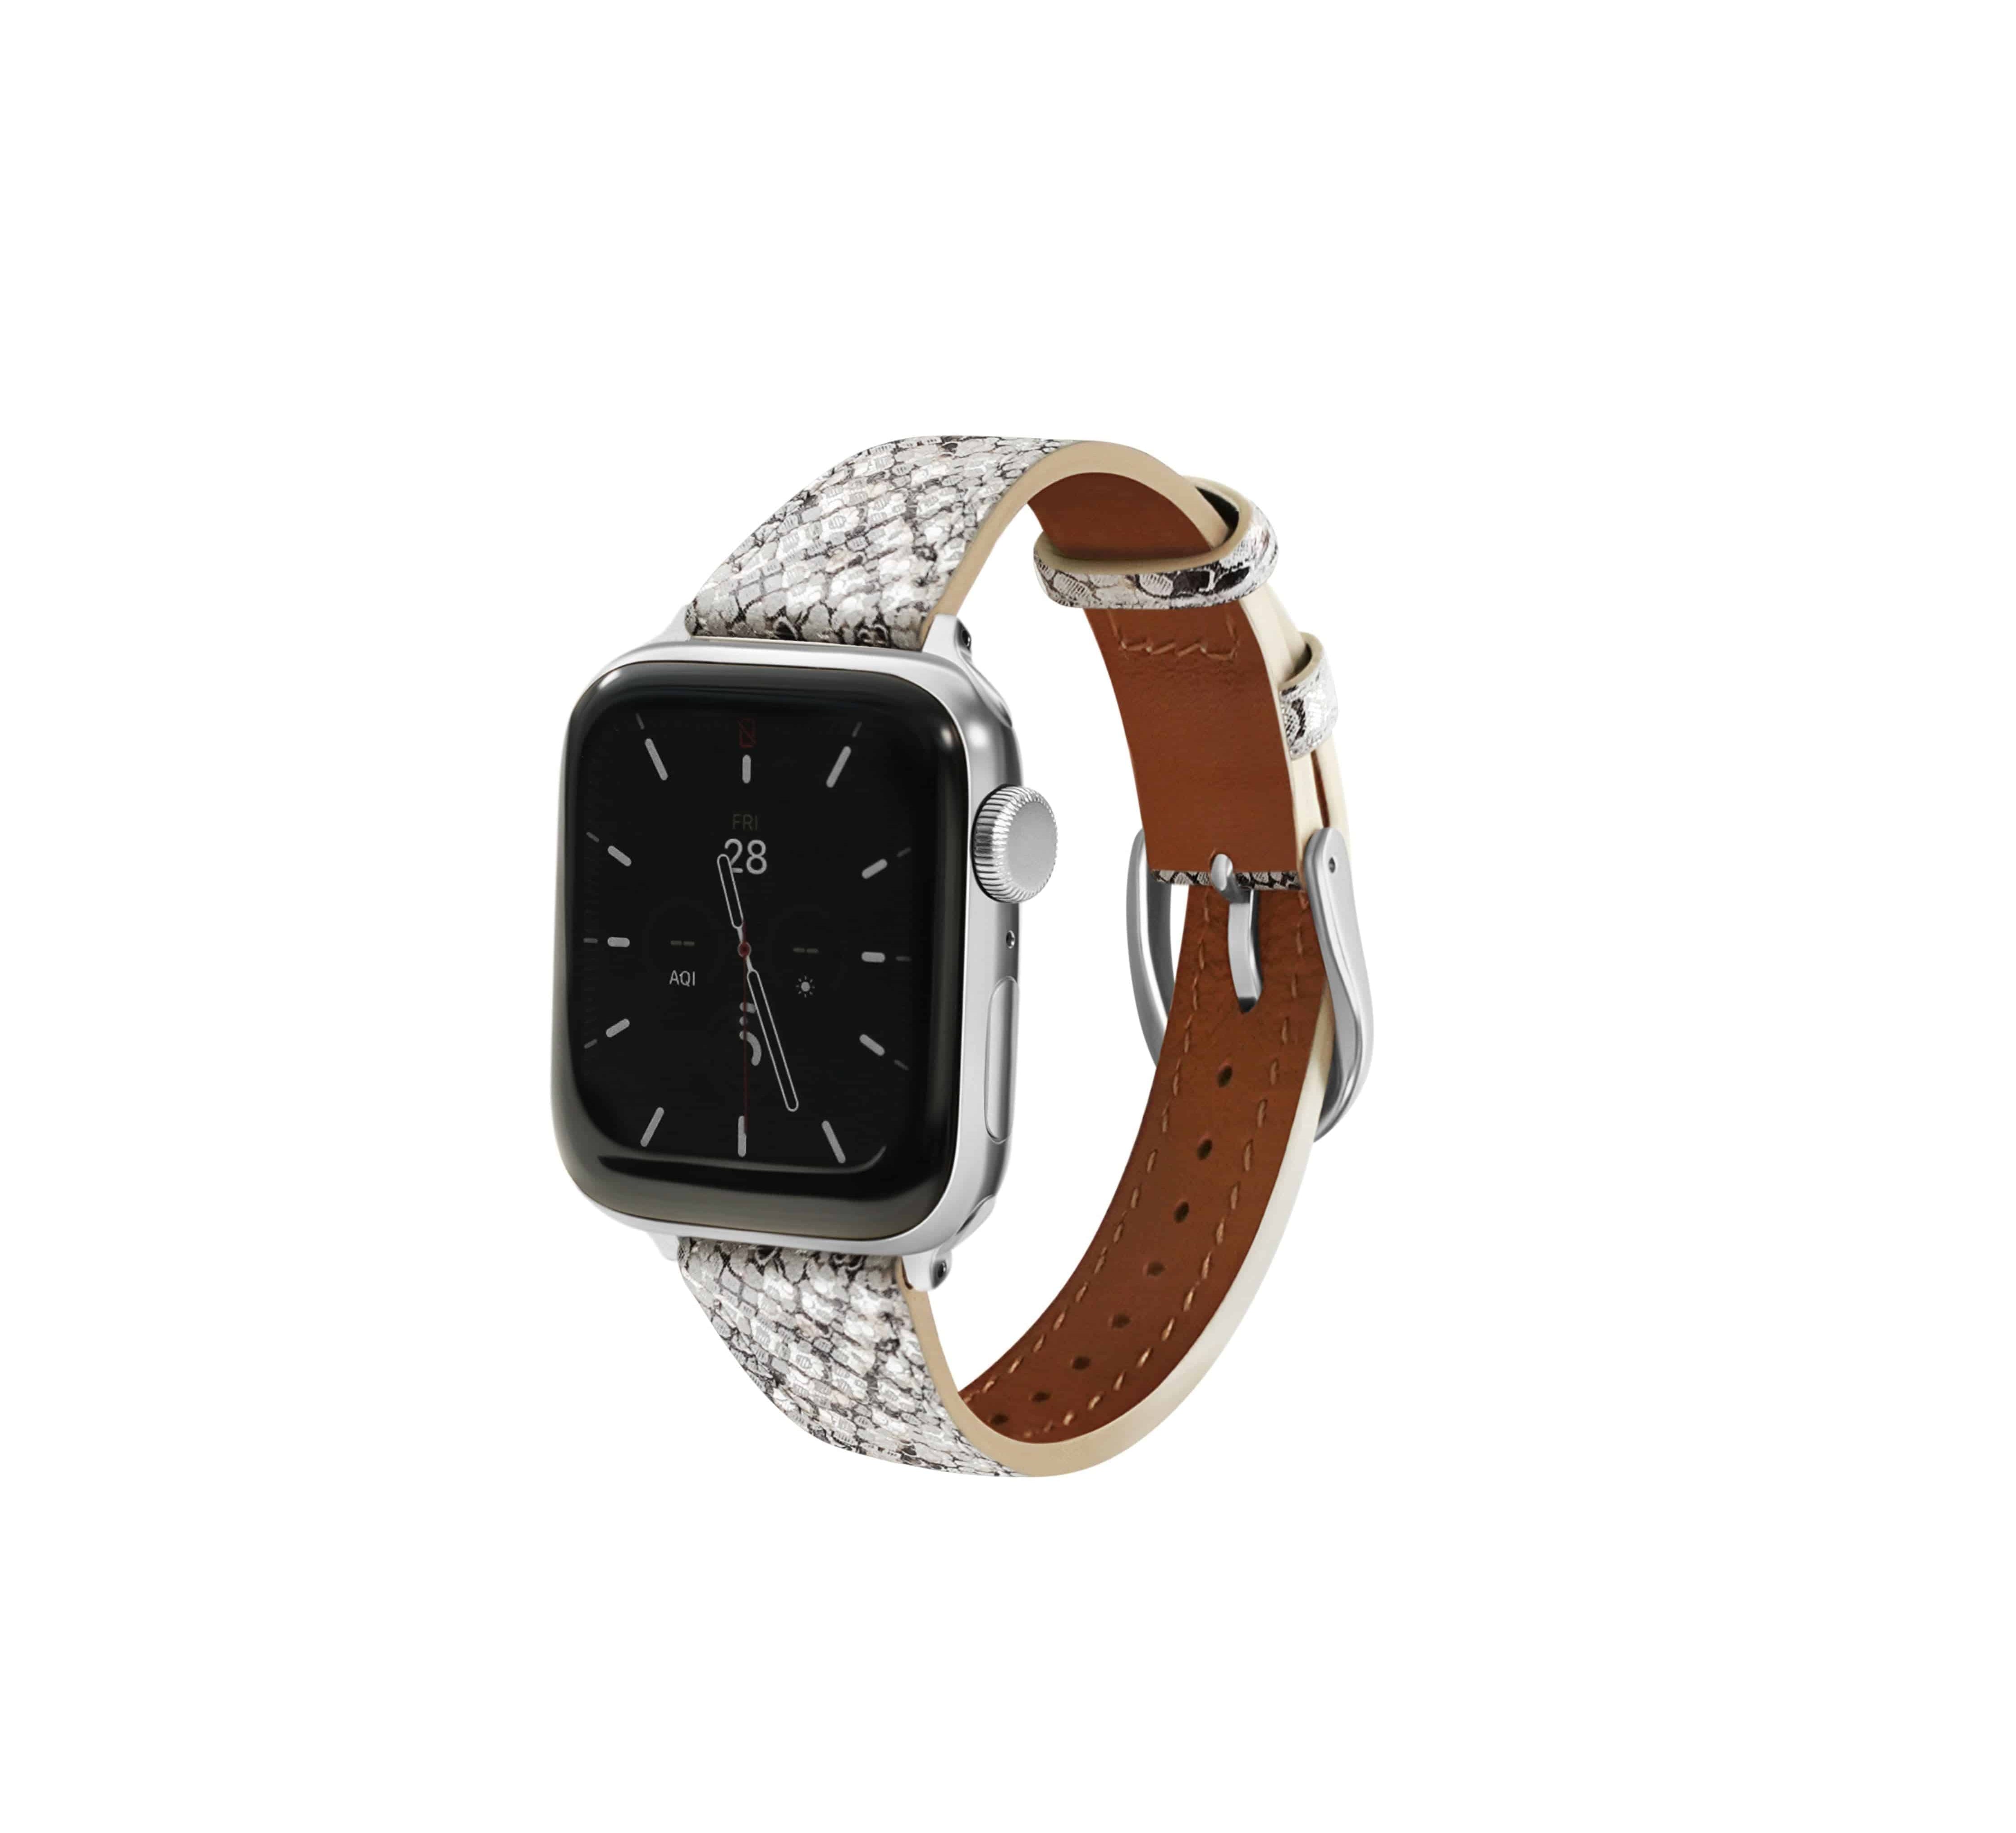 Metallic Snakeskin Printed Band for the Apple Watch - Goldenerre Women's Apple Watch Bands and Jewelry